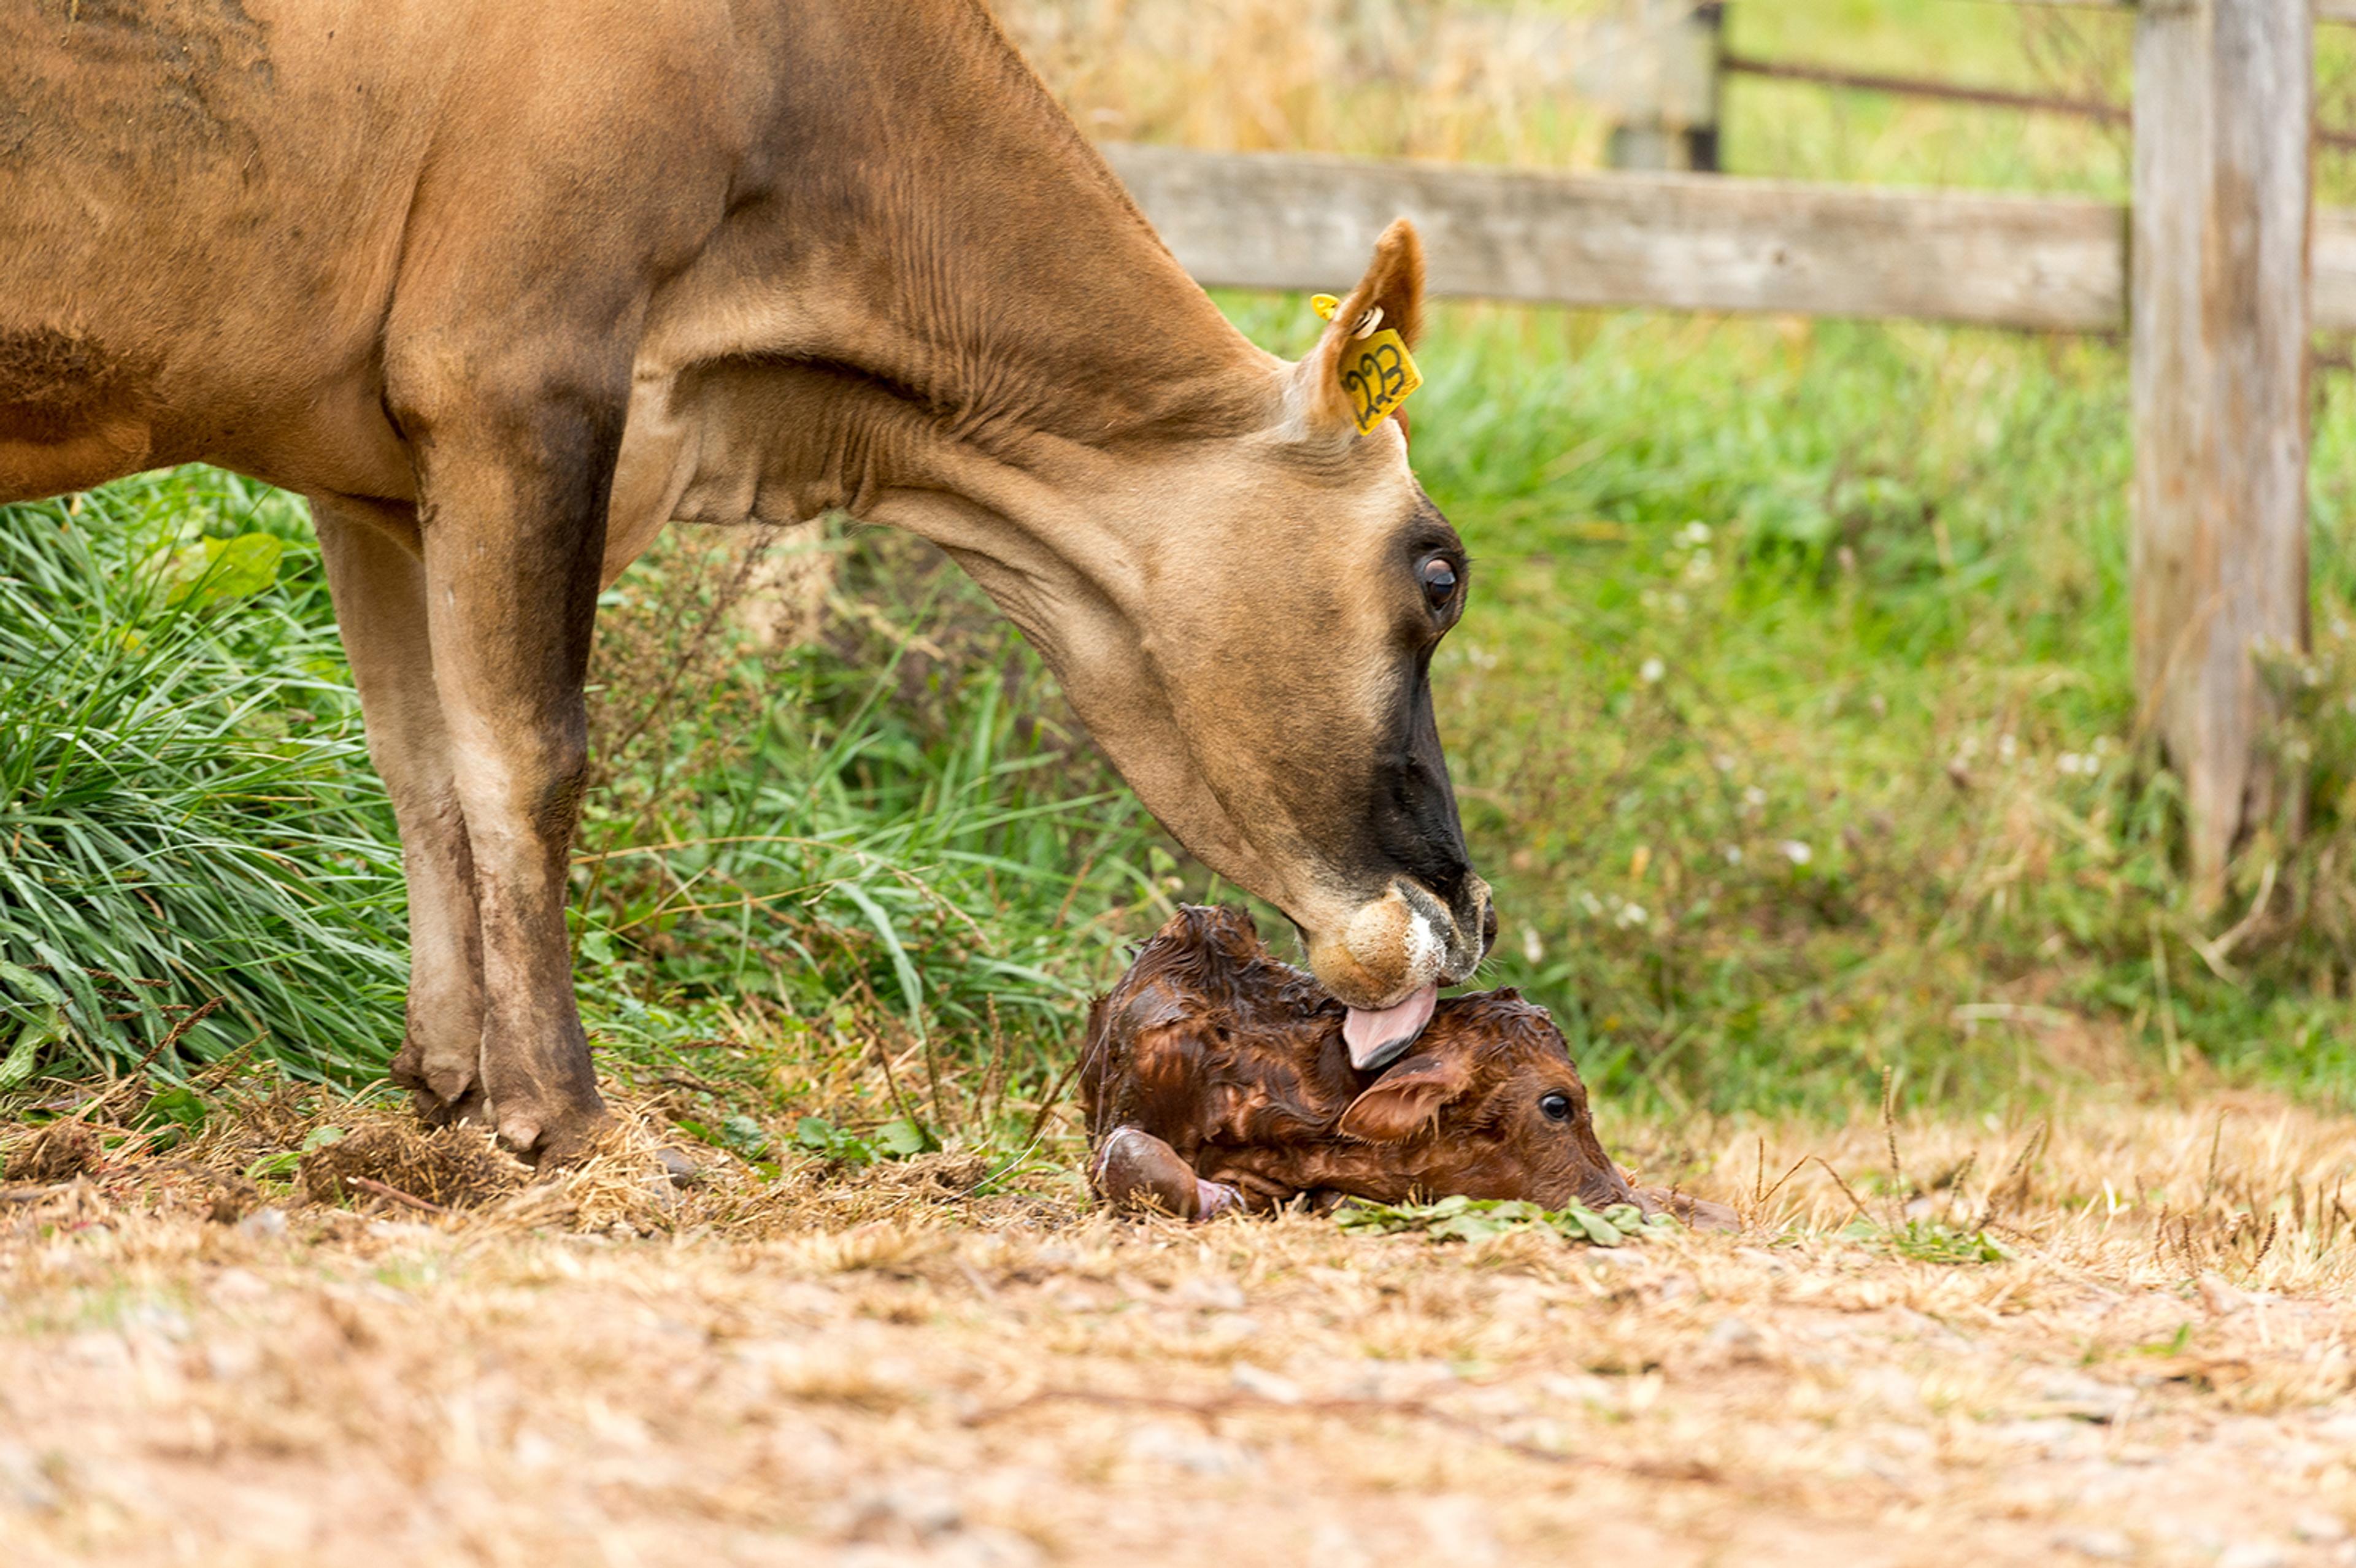 A mother cow cleans her newborn calf.